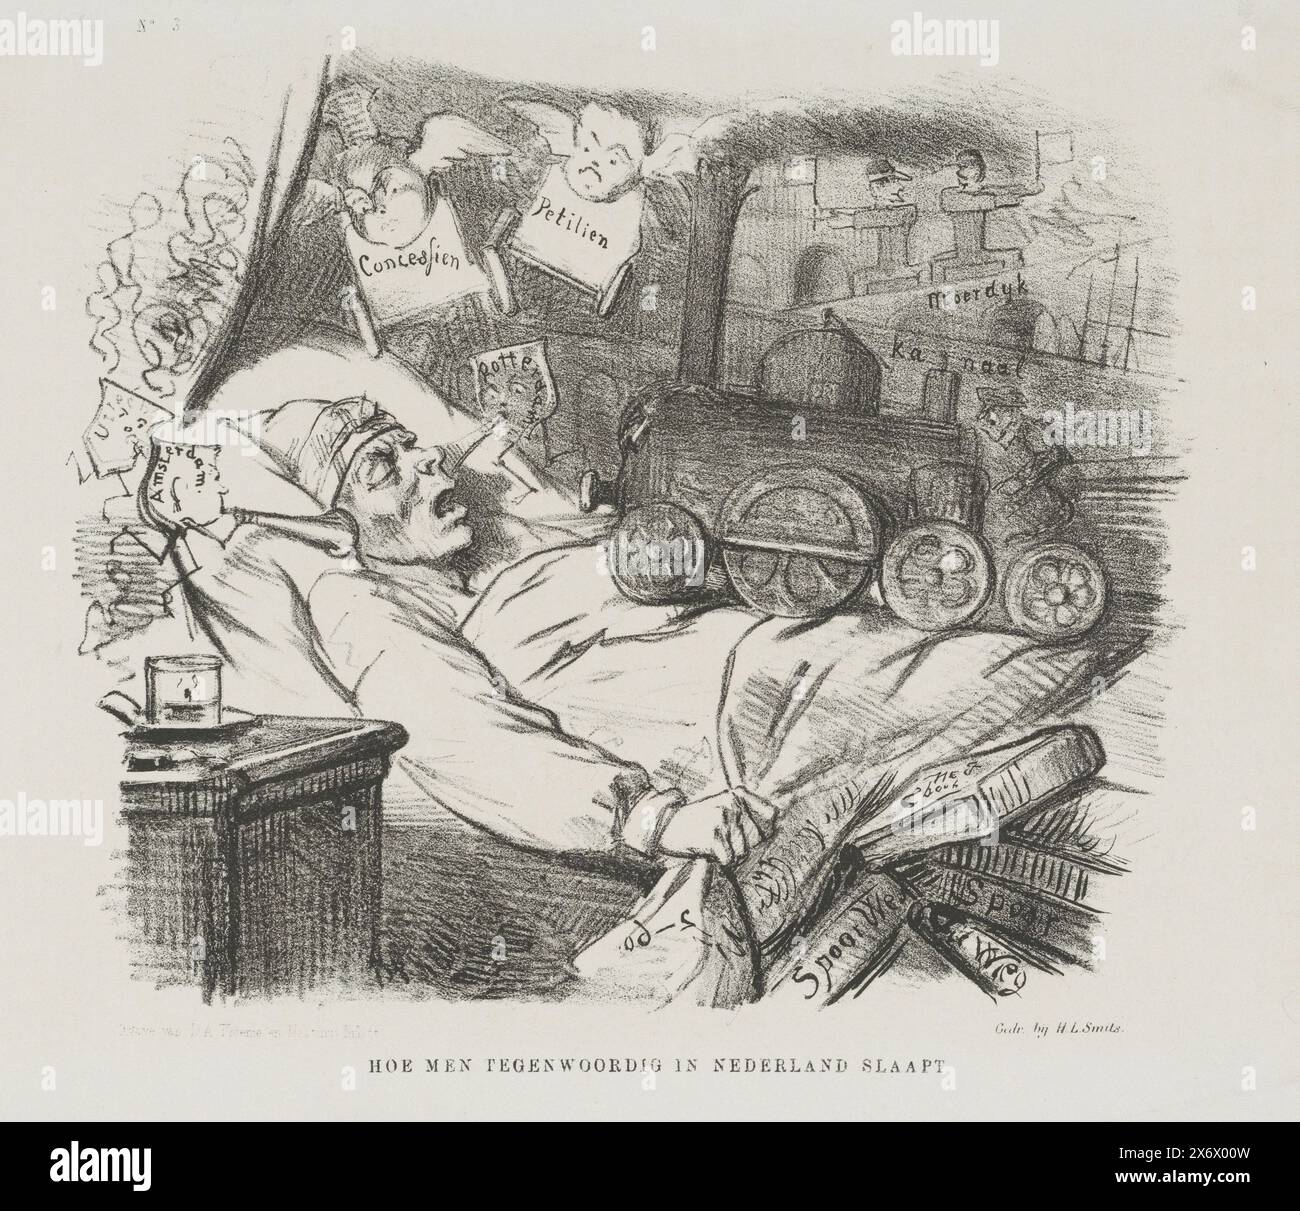 Cartoon on the expansion of the railway network in the Netherlands, 1860, How people sleep in the Netherlands nowadays (title on object), Cartoon on the plans for the expansion of the railway network in the Netherlands. a man sleeping in his bed and dreaming about trains. Plate published in the weekly magazine De Nederlandsche Spectator, no. 3, January 21, 1860., print, print maker: Johan Michaël Schmidt Crans, printer: H.L. Smits, (mentioned on object), publisher: Dirk Anthonie Thieme, (mentioned on object), print maker: Netherlands, printer: Netherlands, publisher: Arnhem, publisher: The Stock Photo